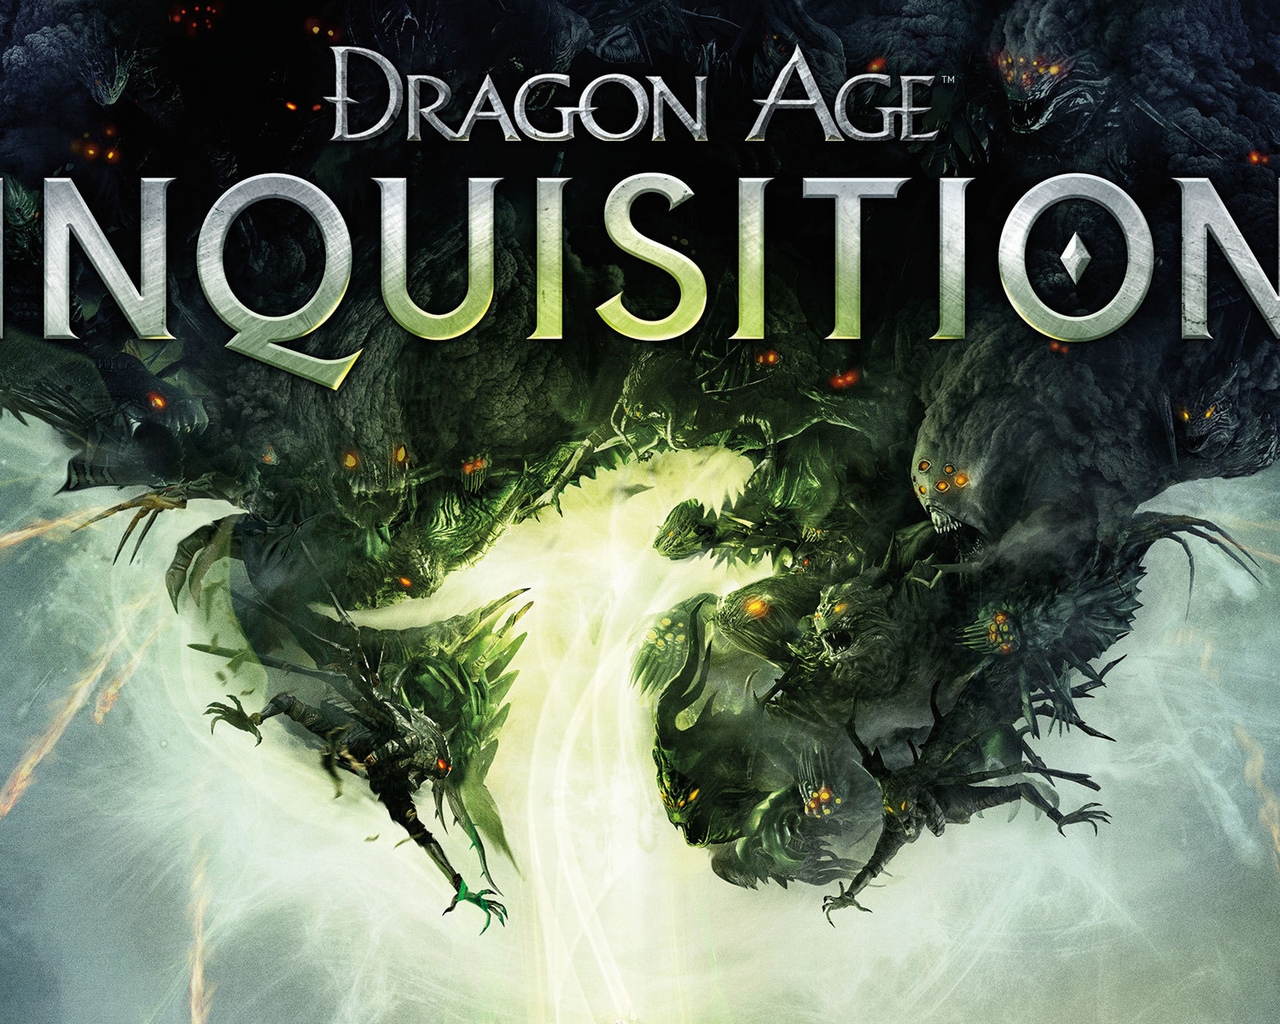 Dragon Age Inquisition Game for 1280 x 1024 resolution